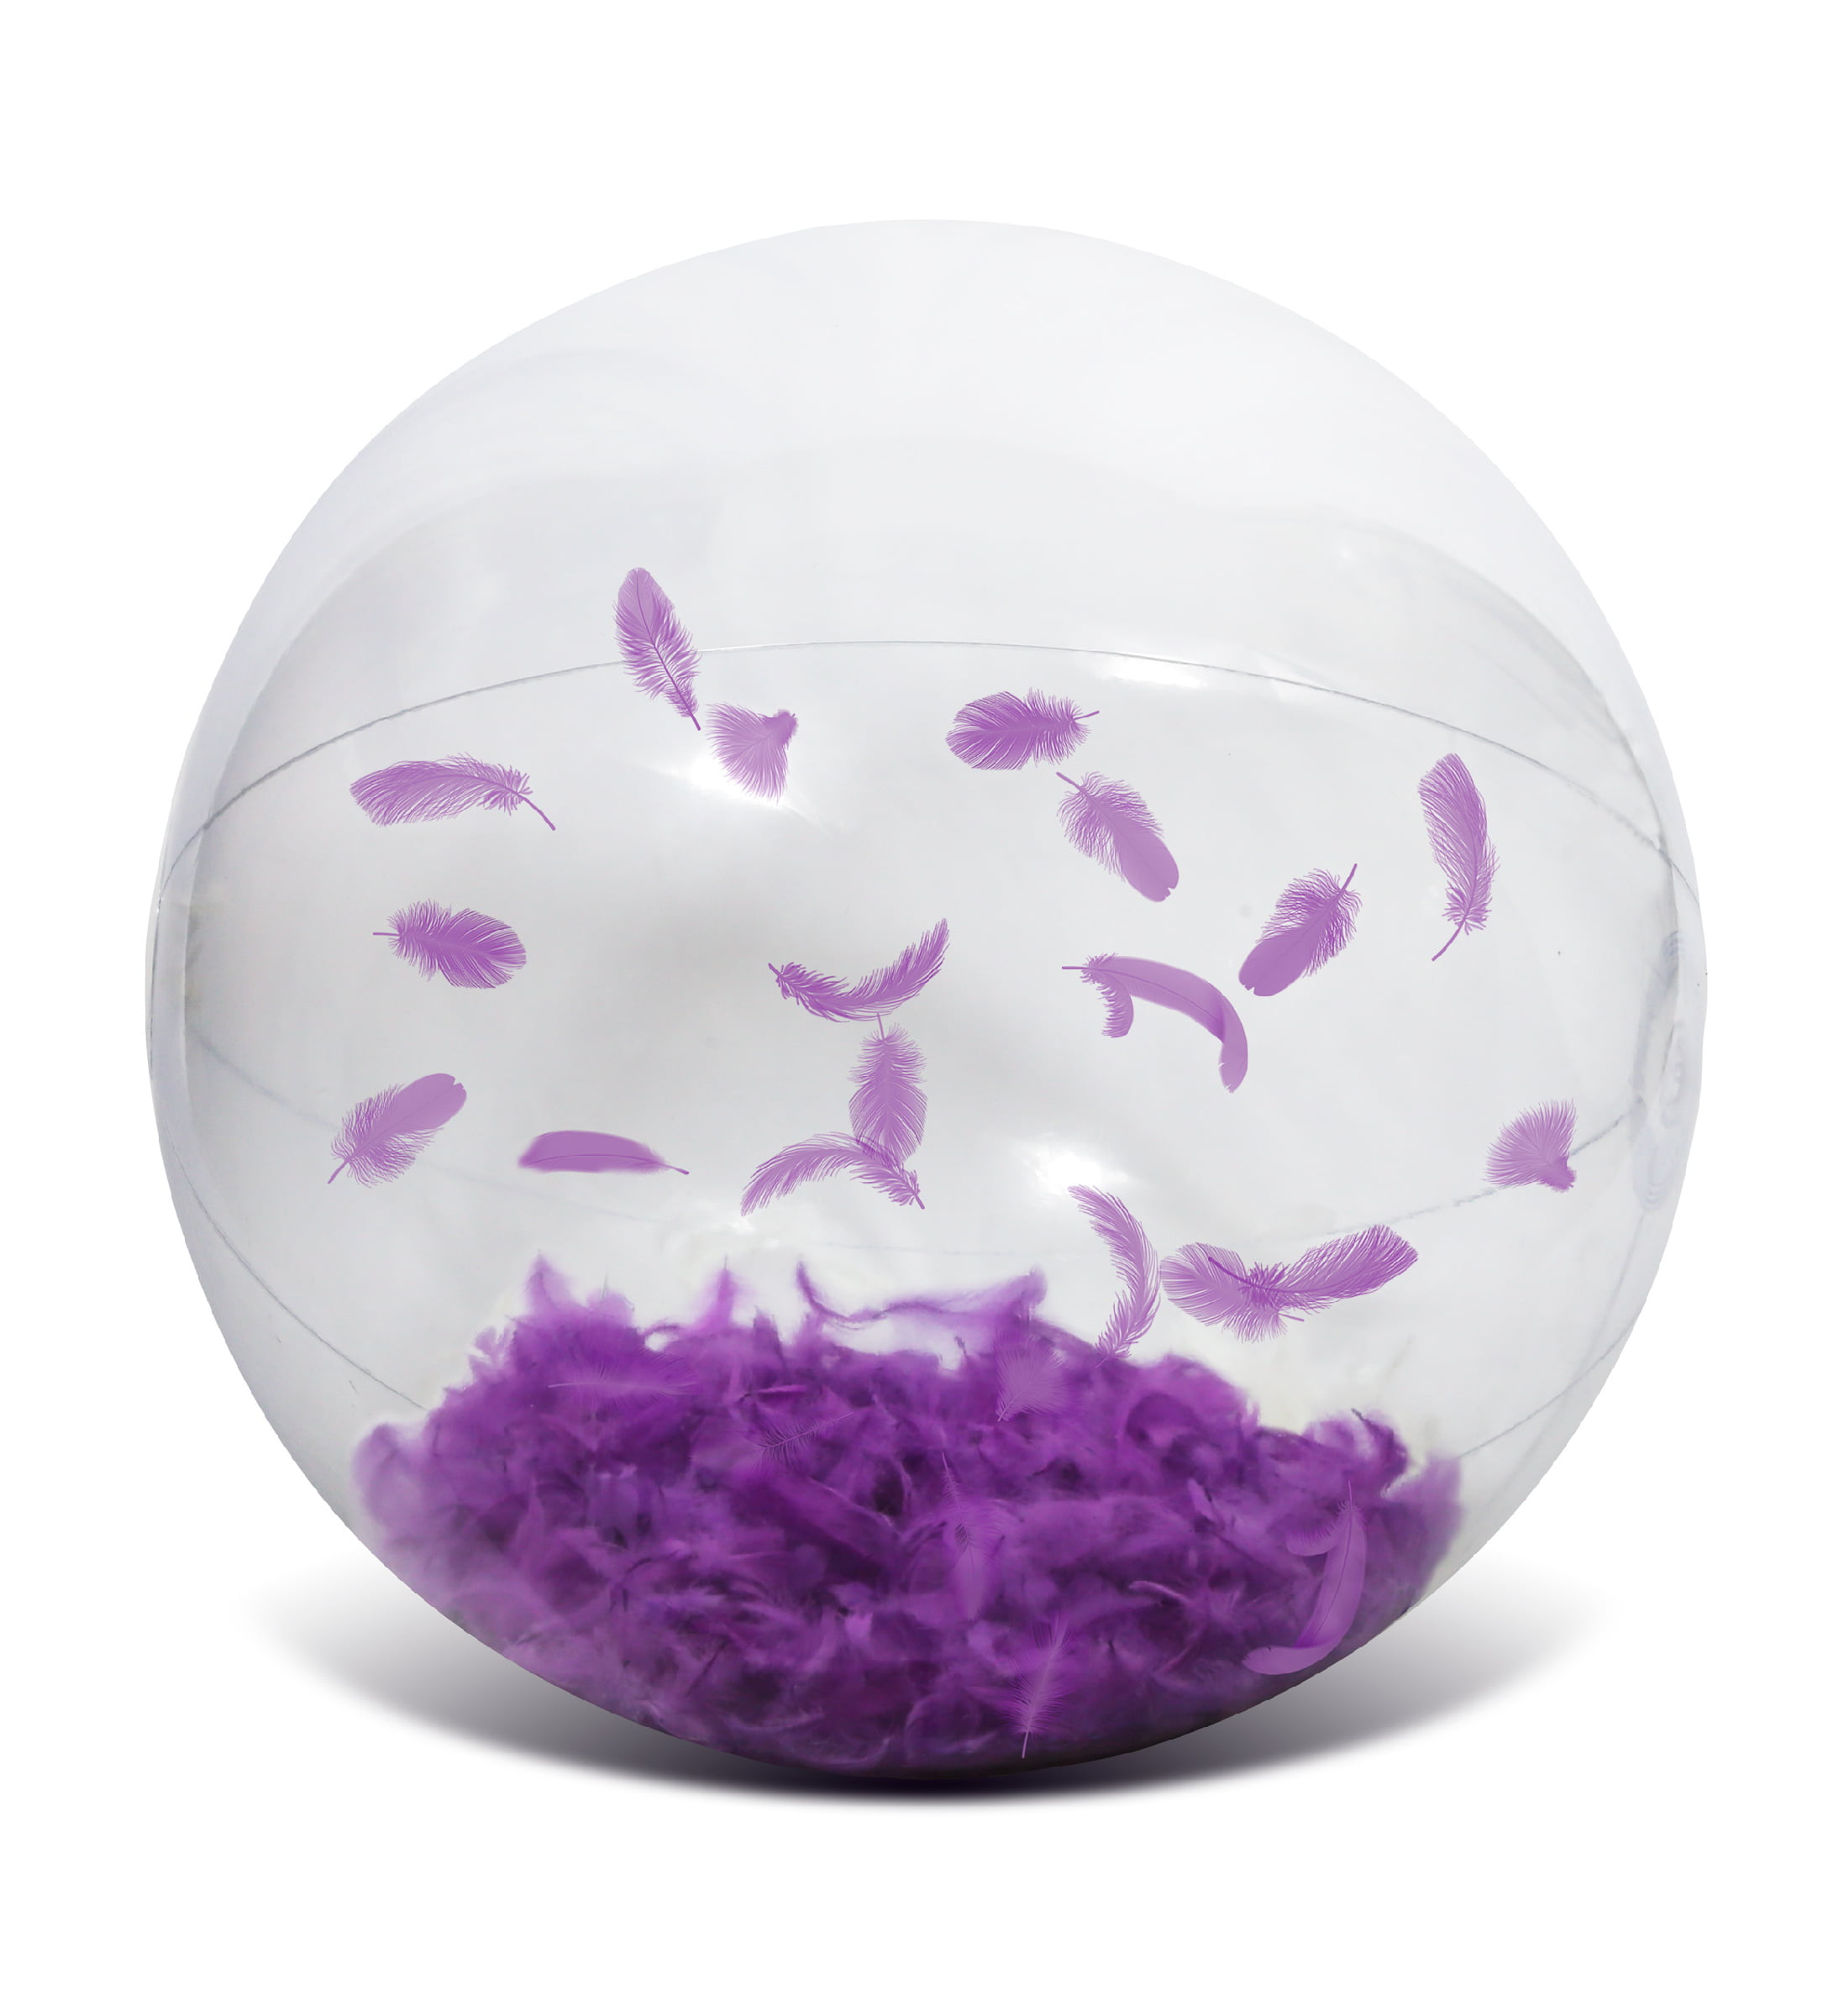 Premium Beach Theme Water Sand Toy Favors Beach Party Decoration CoTa Global Purple Feather Inflatable Large Beach Ball Pool Accessory Confetti 24 Inch Pool Party Supplies Beach Balls 